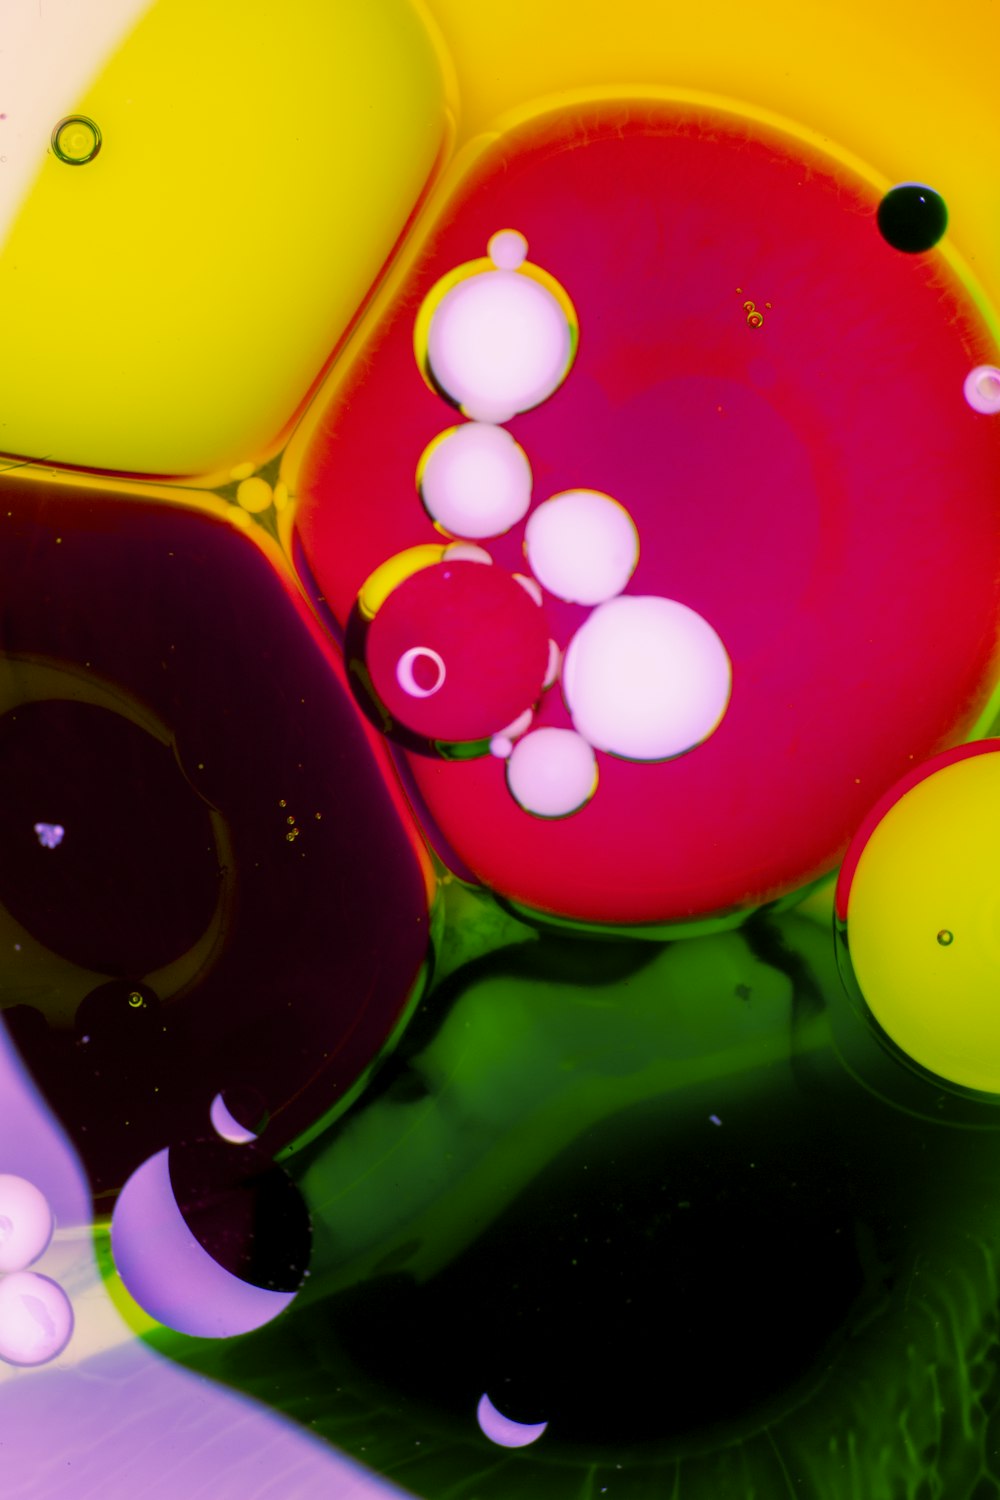 a close up of a multicolored object with bubbles